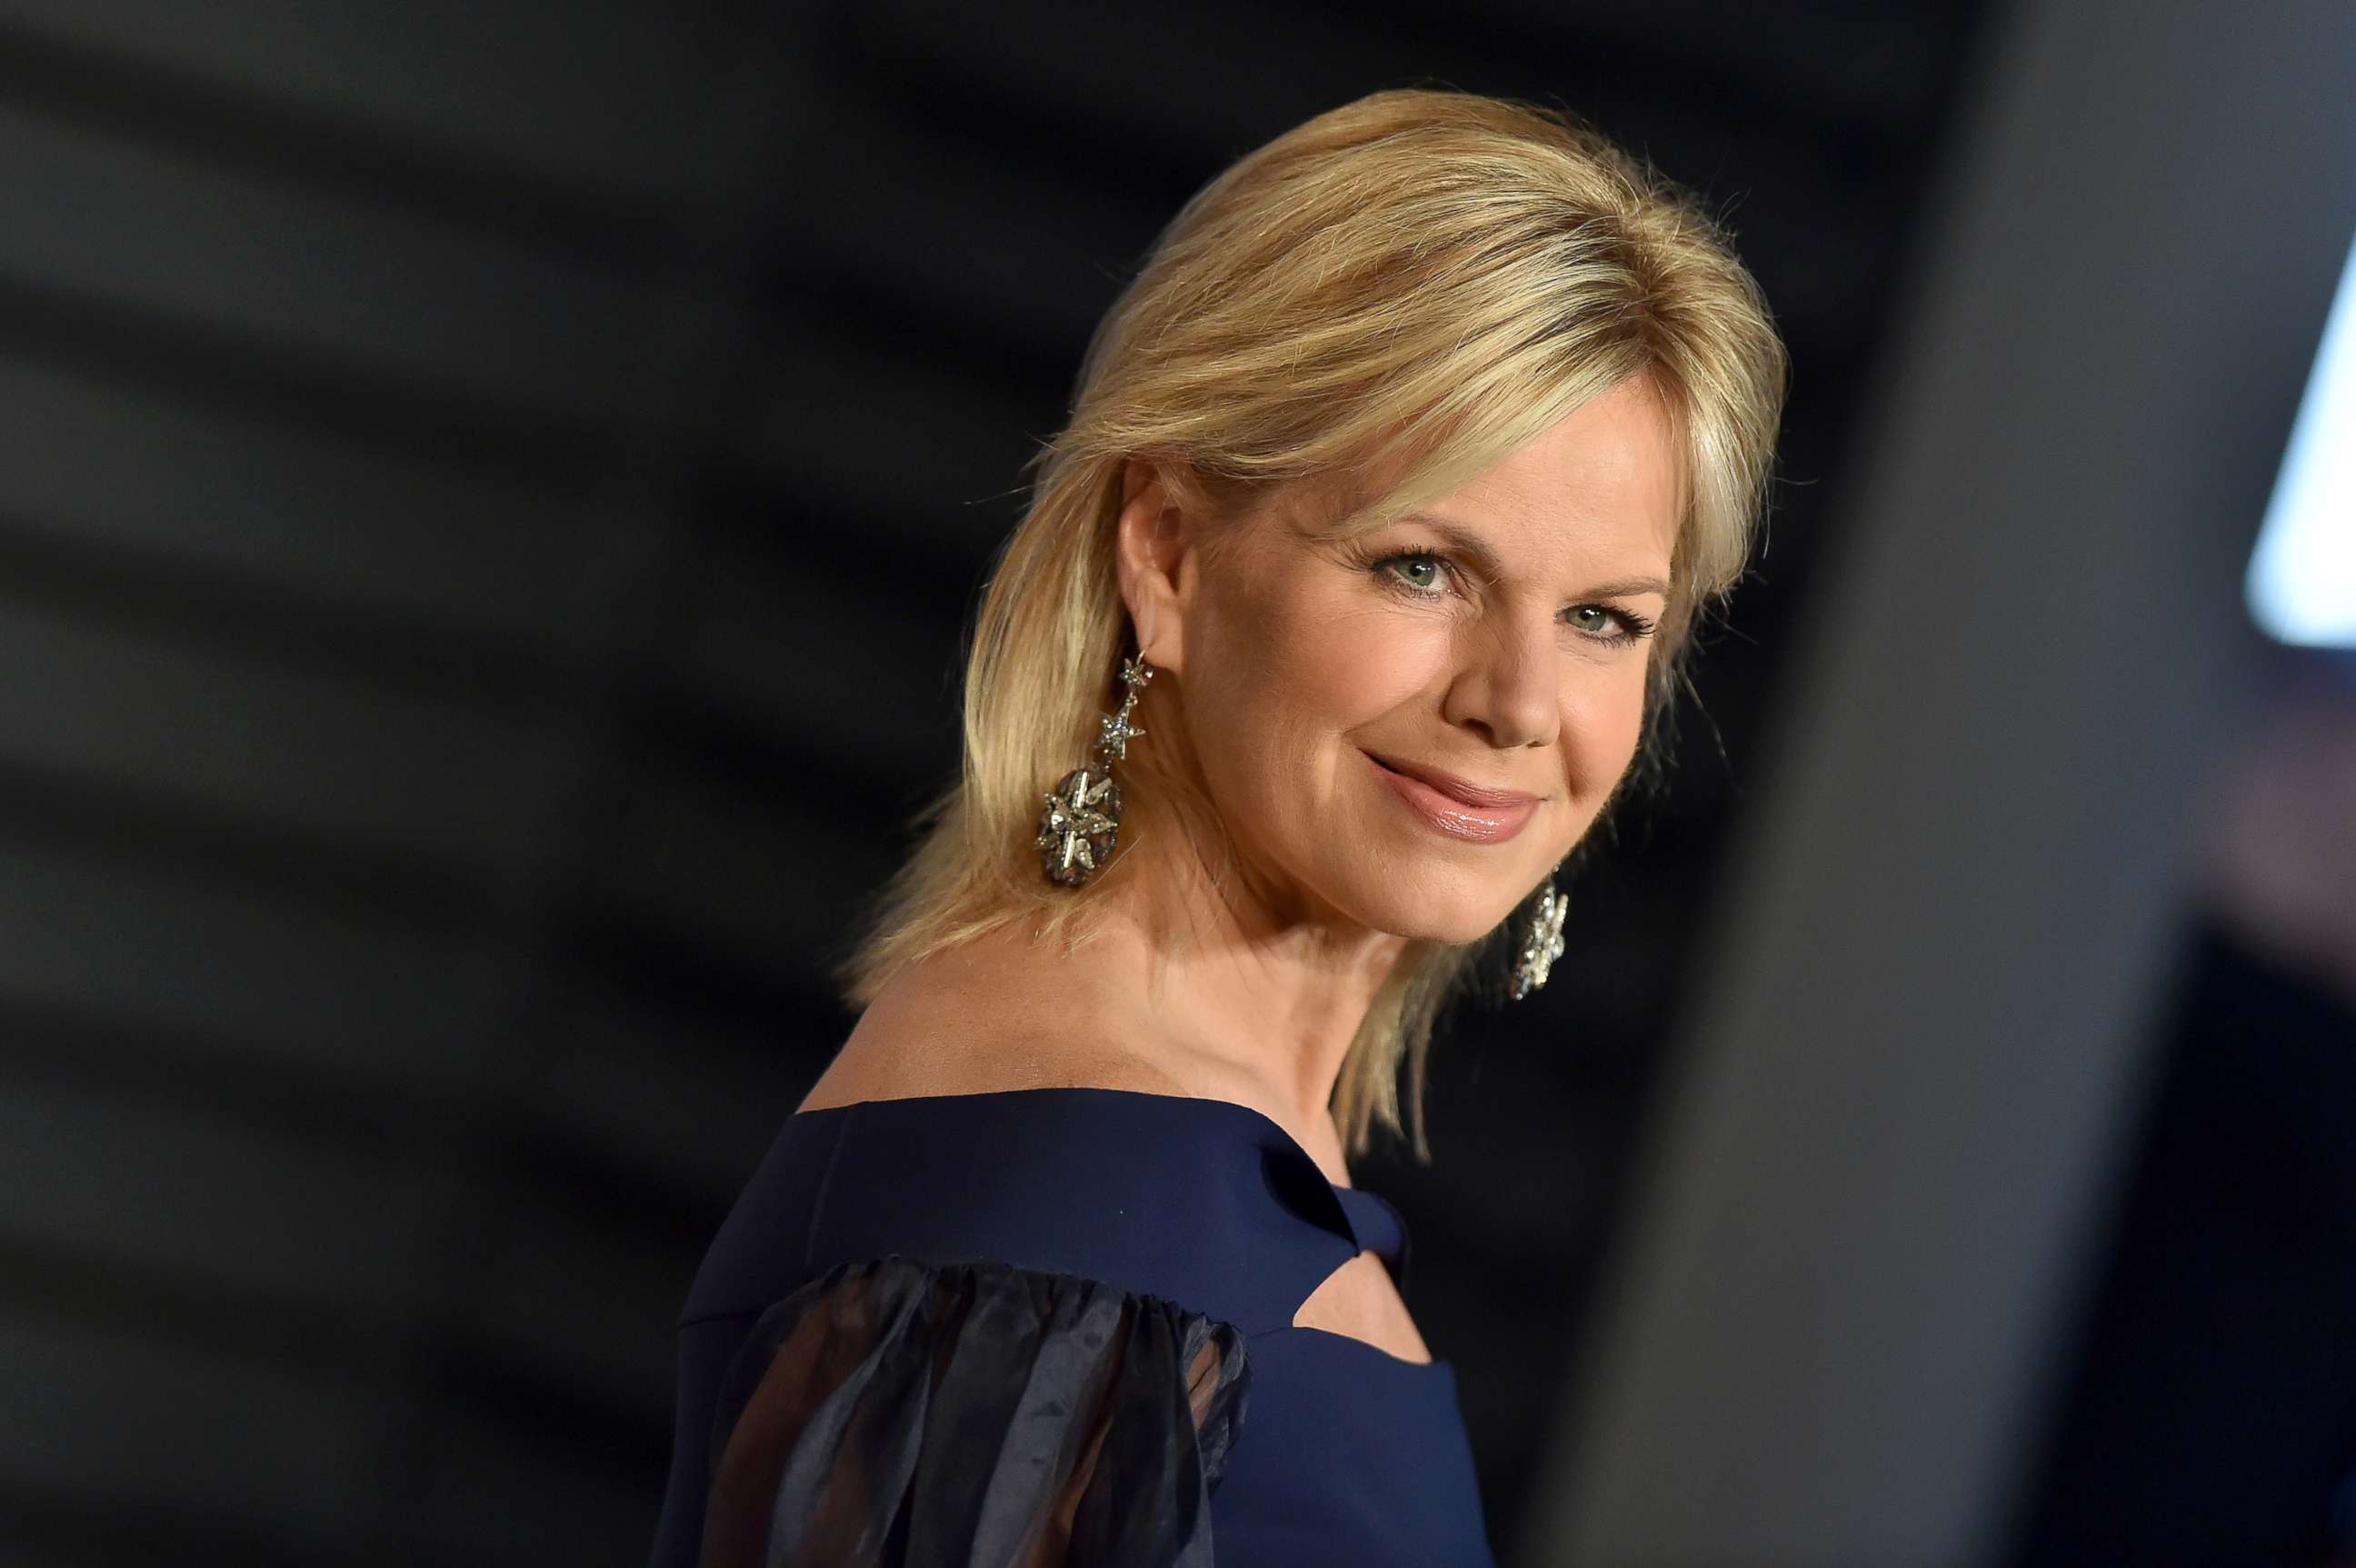 PHOTO: Gretchen Carlson attends the 2018 Vanity Fair Oscar Party at Wallis Annenberg Center for the Performing Arts, March 4, 2018, in Beverly Hills, Calif.